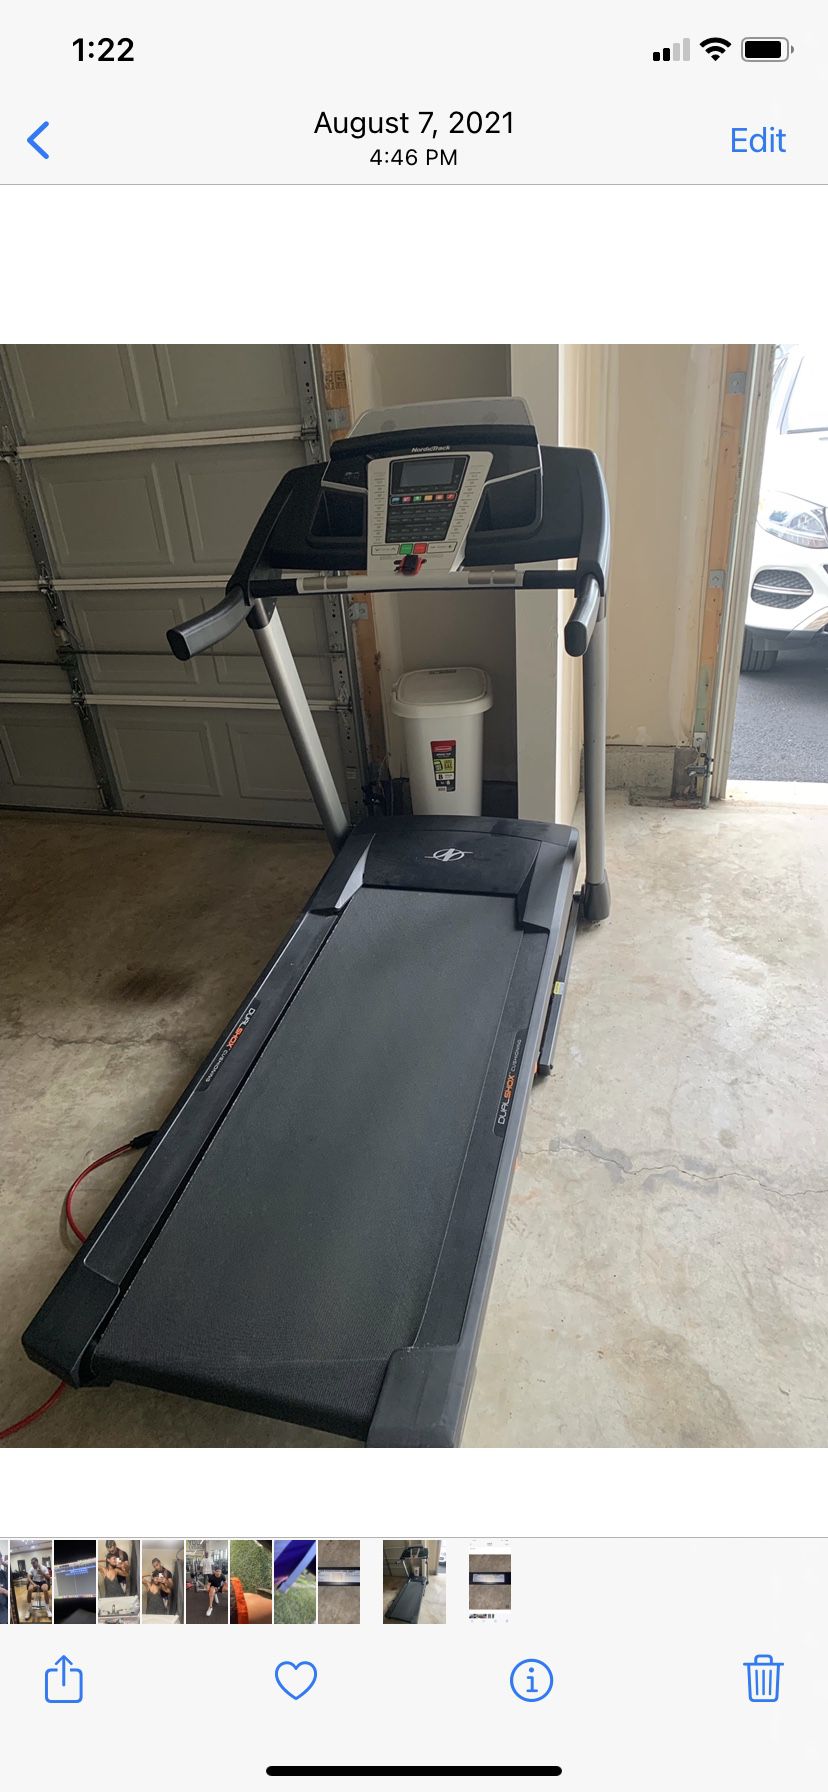 Nordic Track Treadmill *Need Gone By This Weekend 